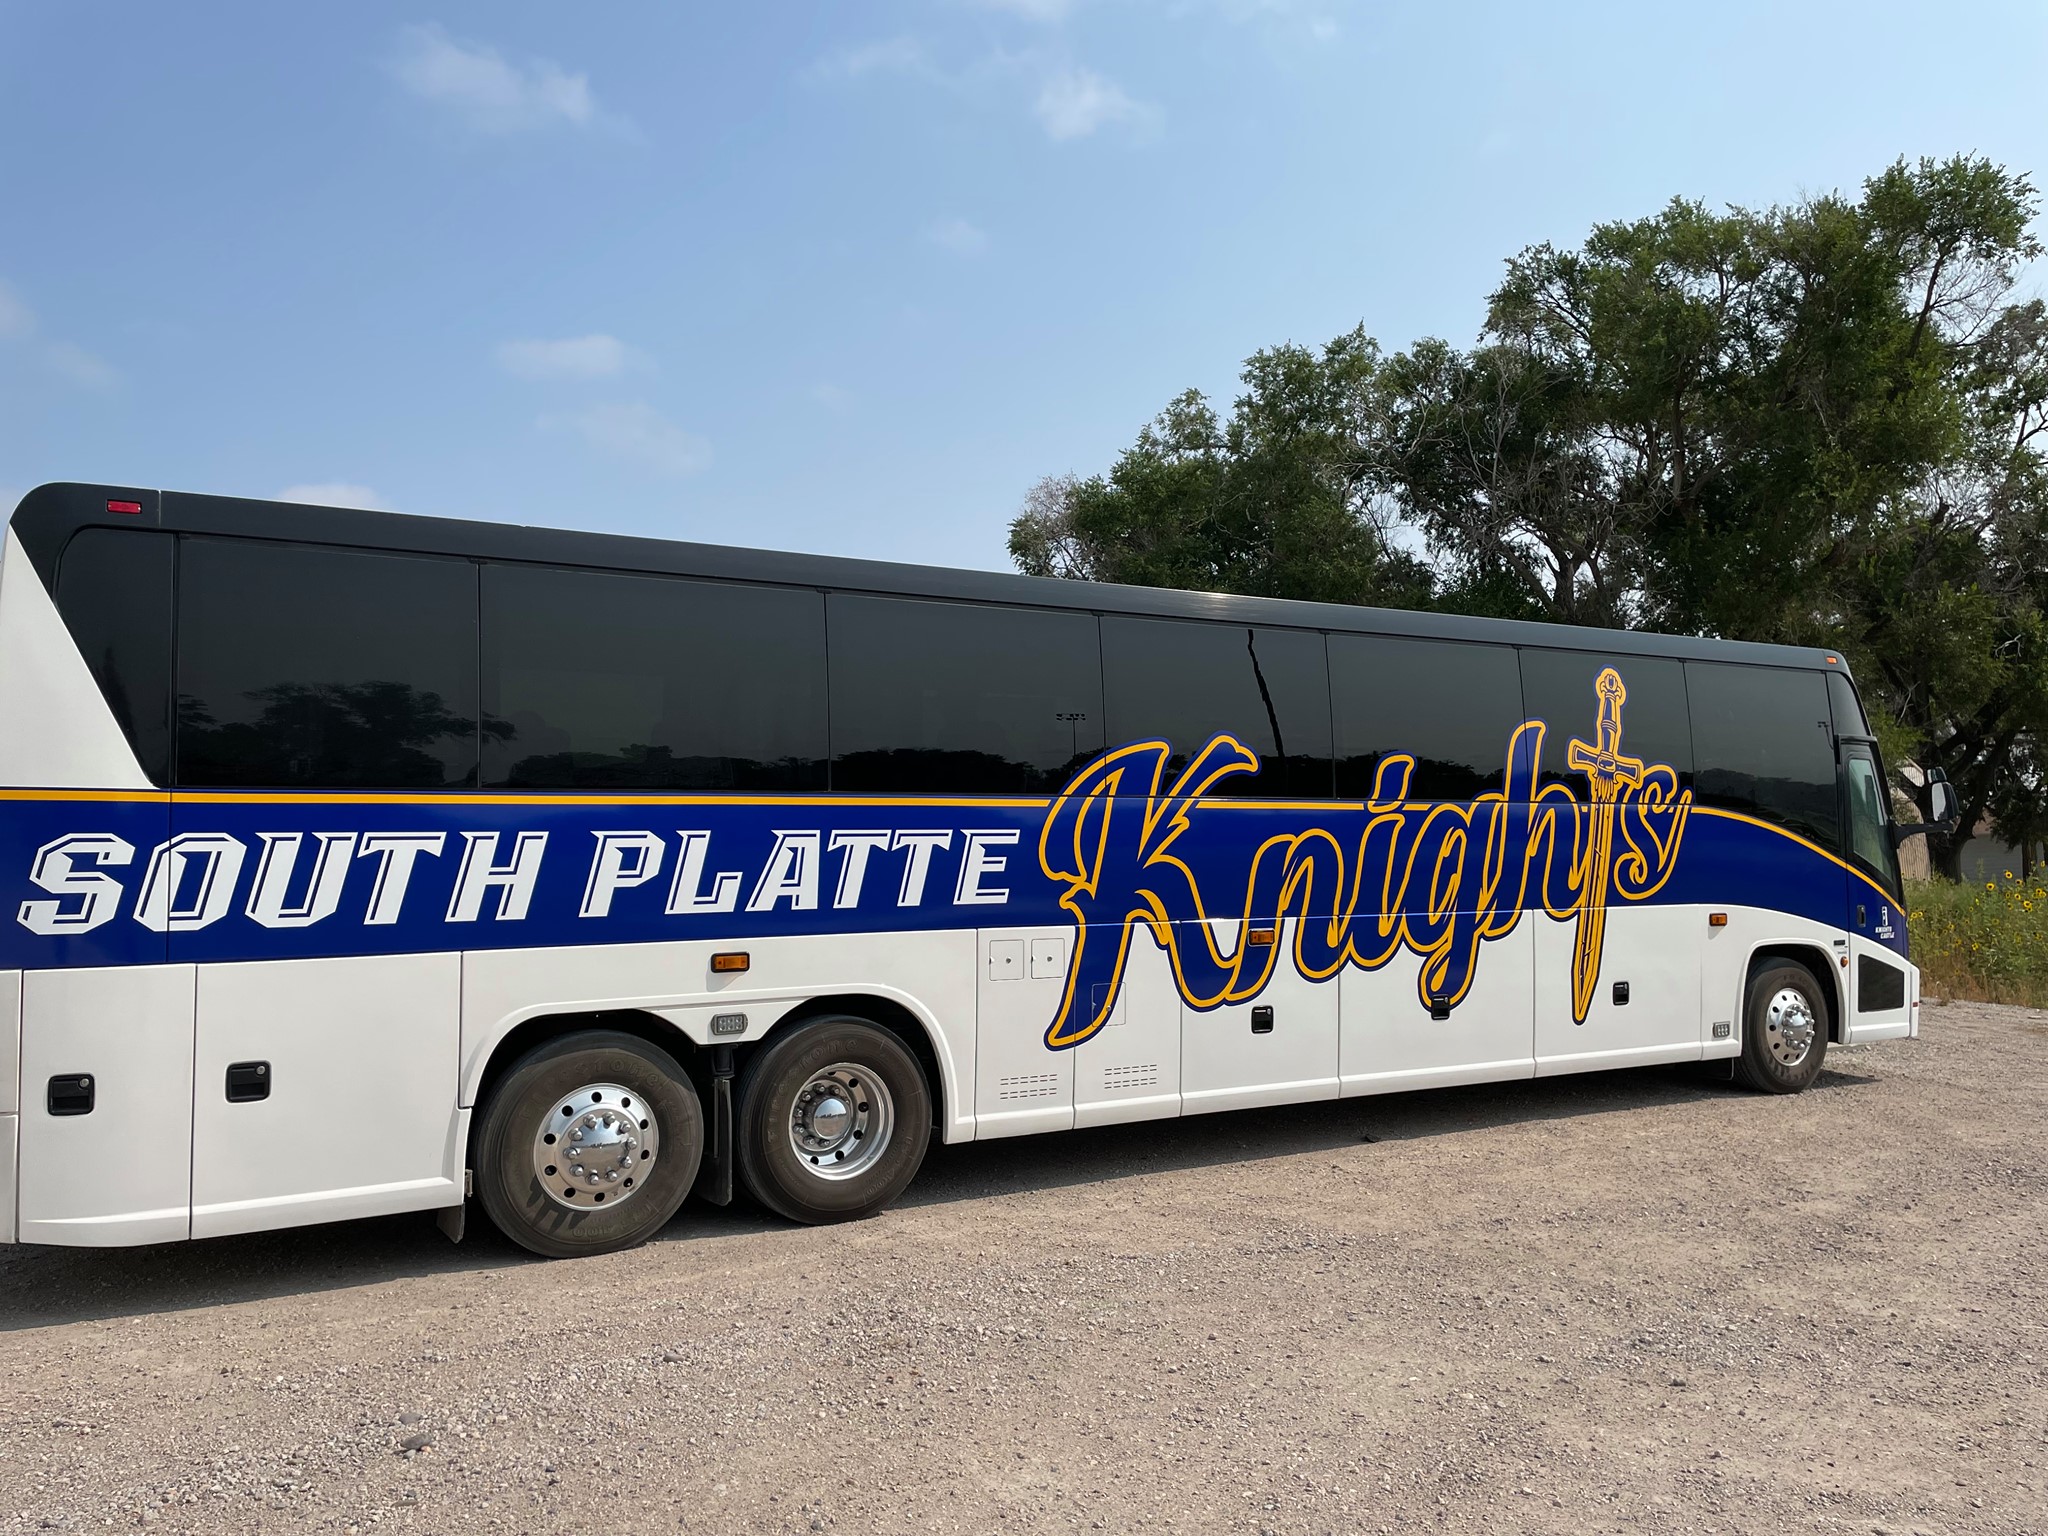 Charter bus labeled South Platte Knights